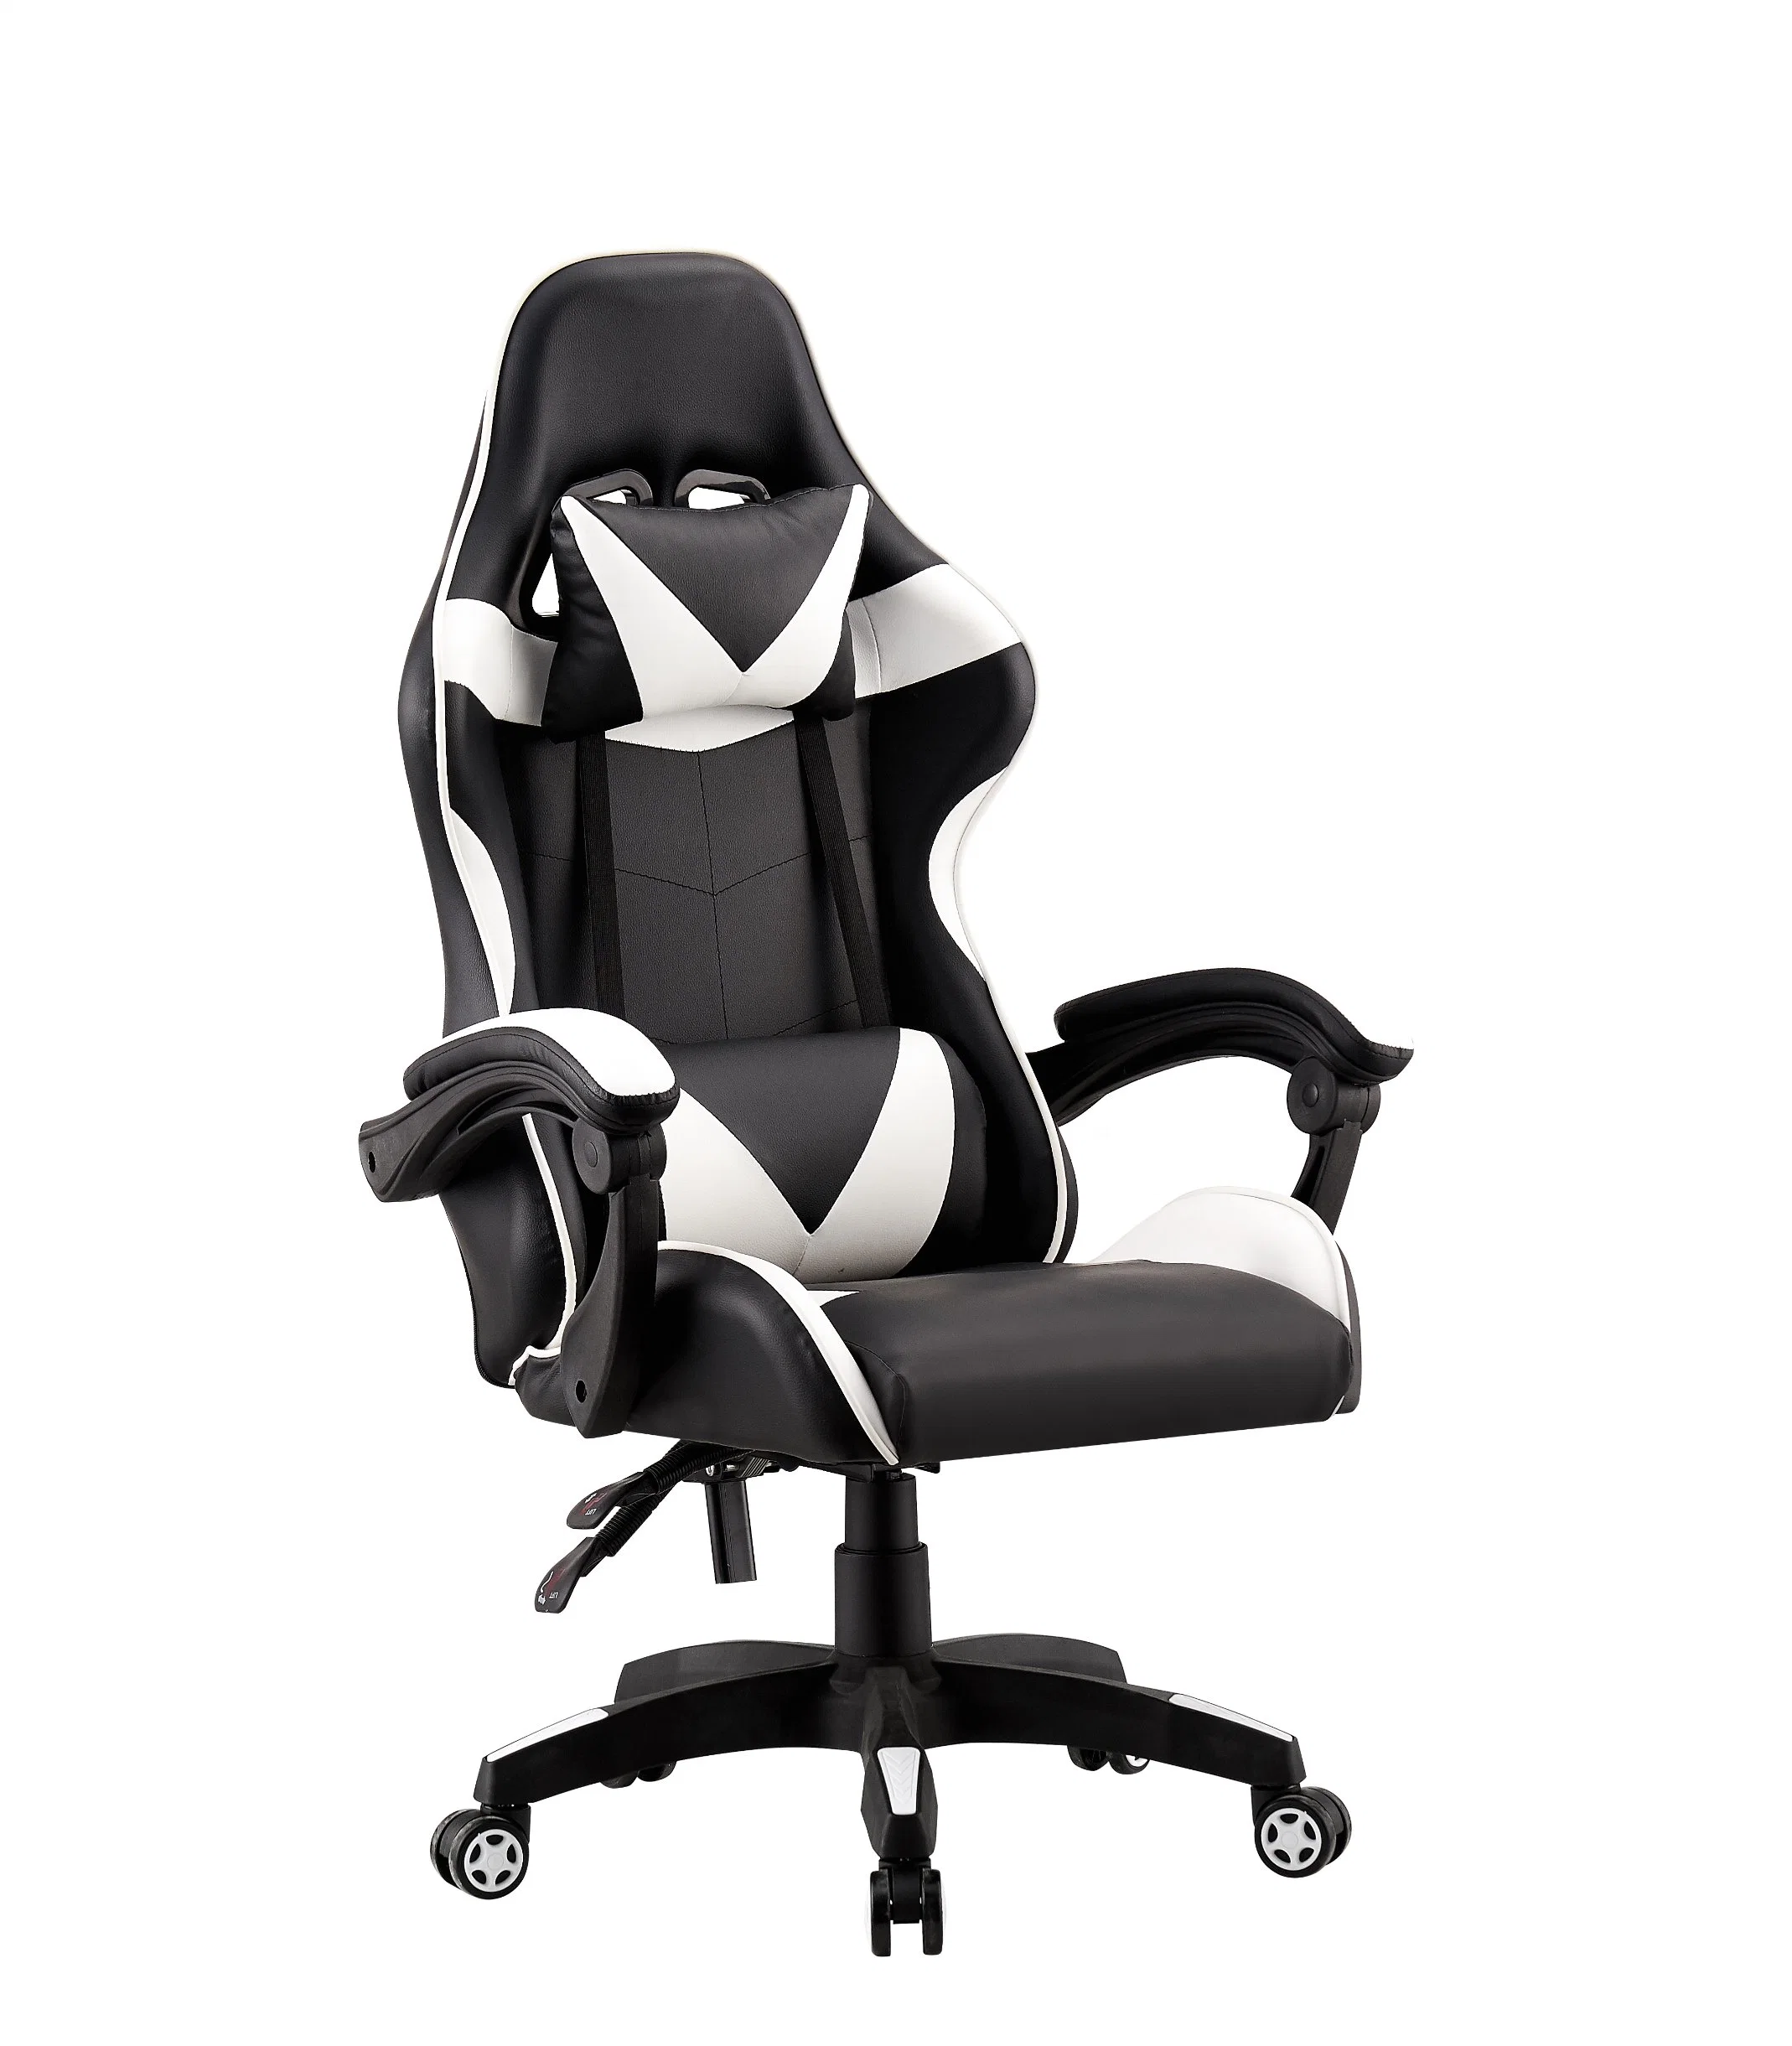 China Wholesale/Supplier Market Best Cadeira/Silla/Computer Racing/Gamer/Game/Gaming Chairs Price for Lift/Recliner/Swivel/Office/High Back/Ergonomic